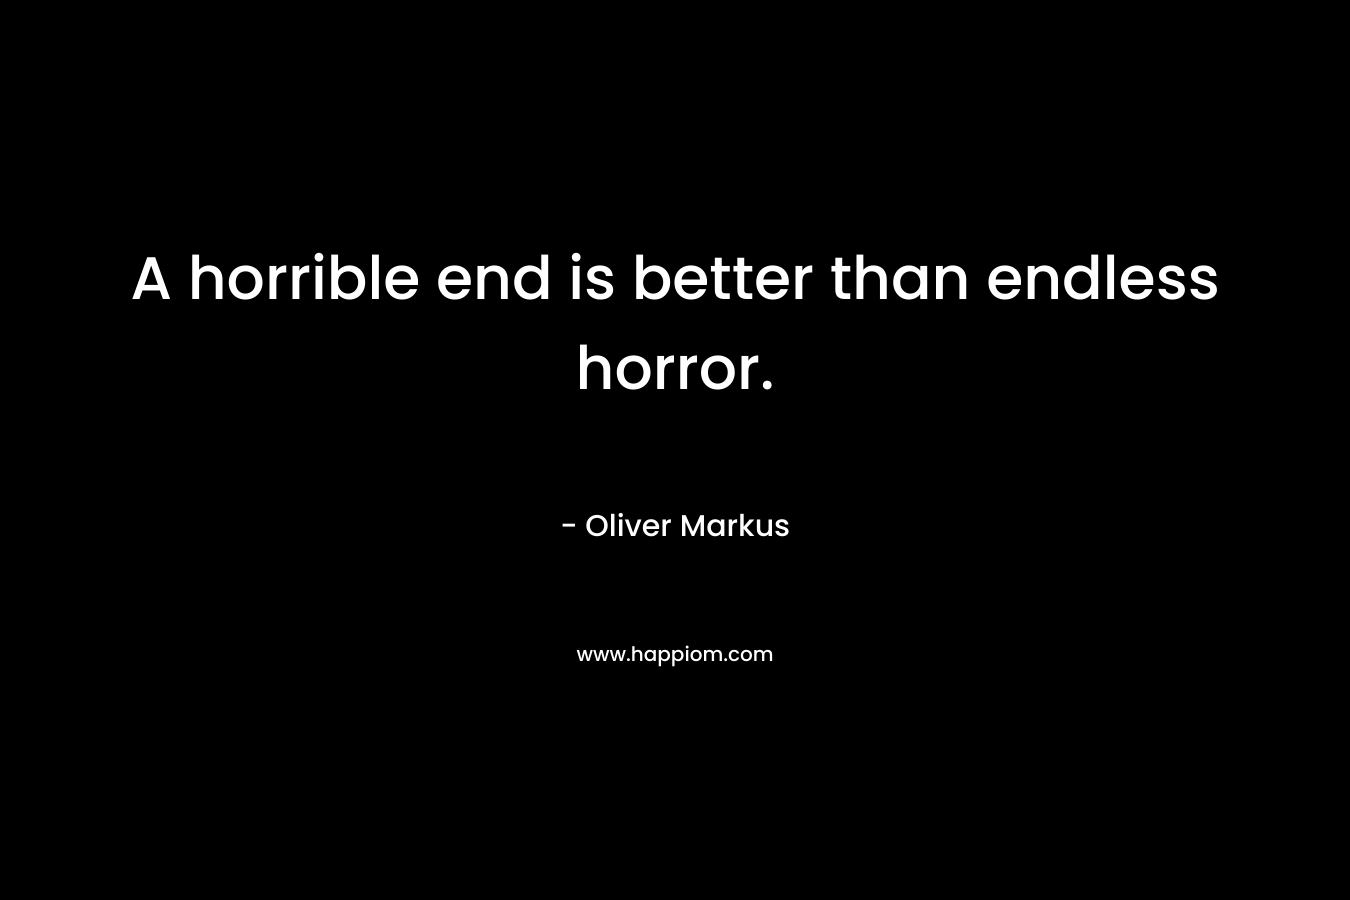 A horrible end is better than endless horror. – Oliver Markus